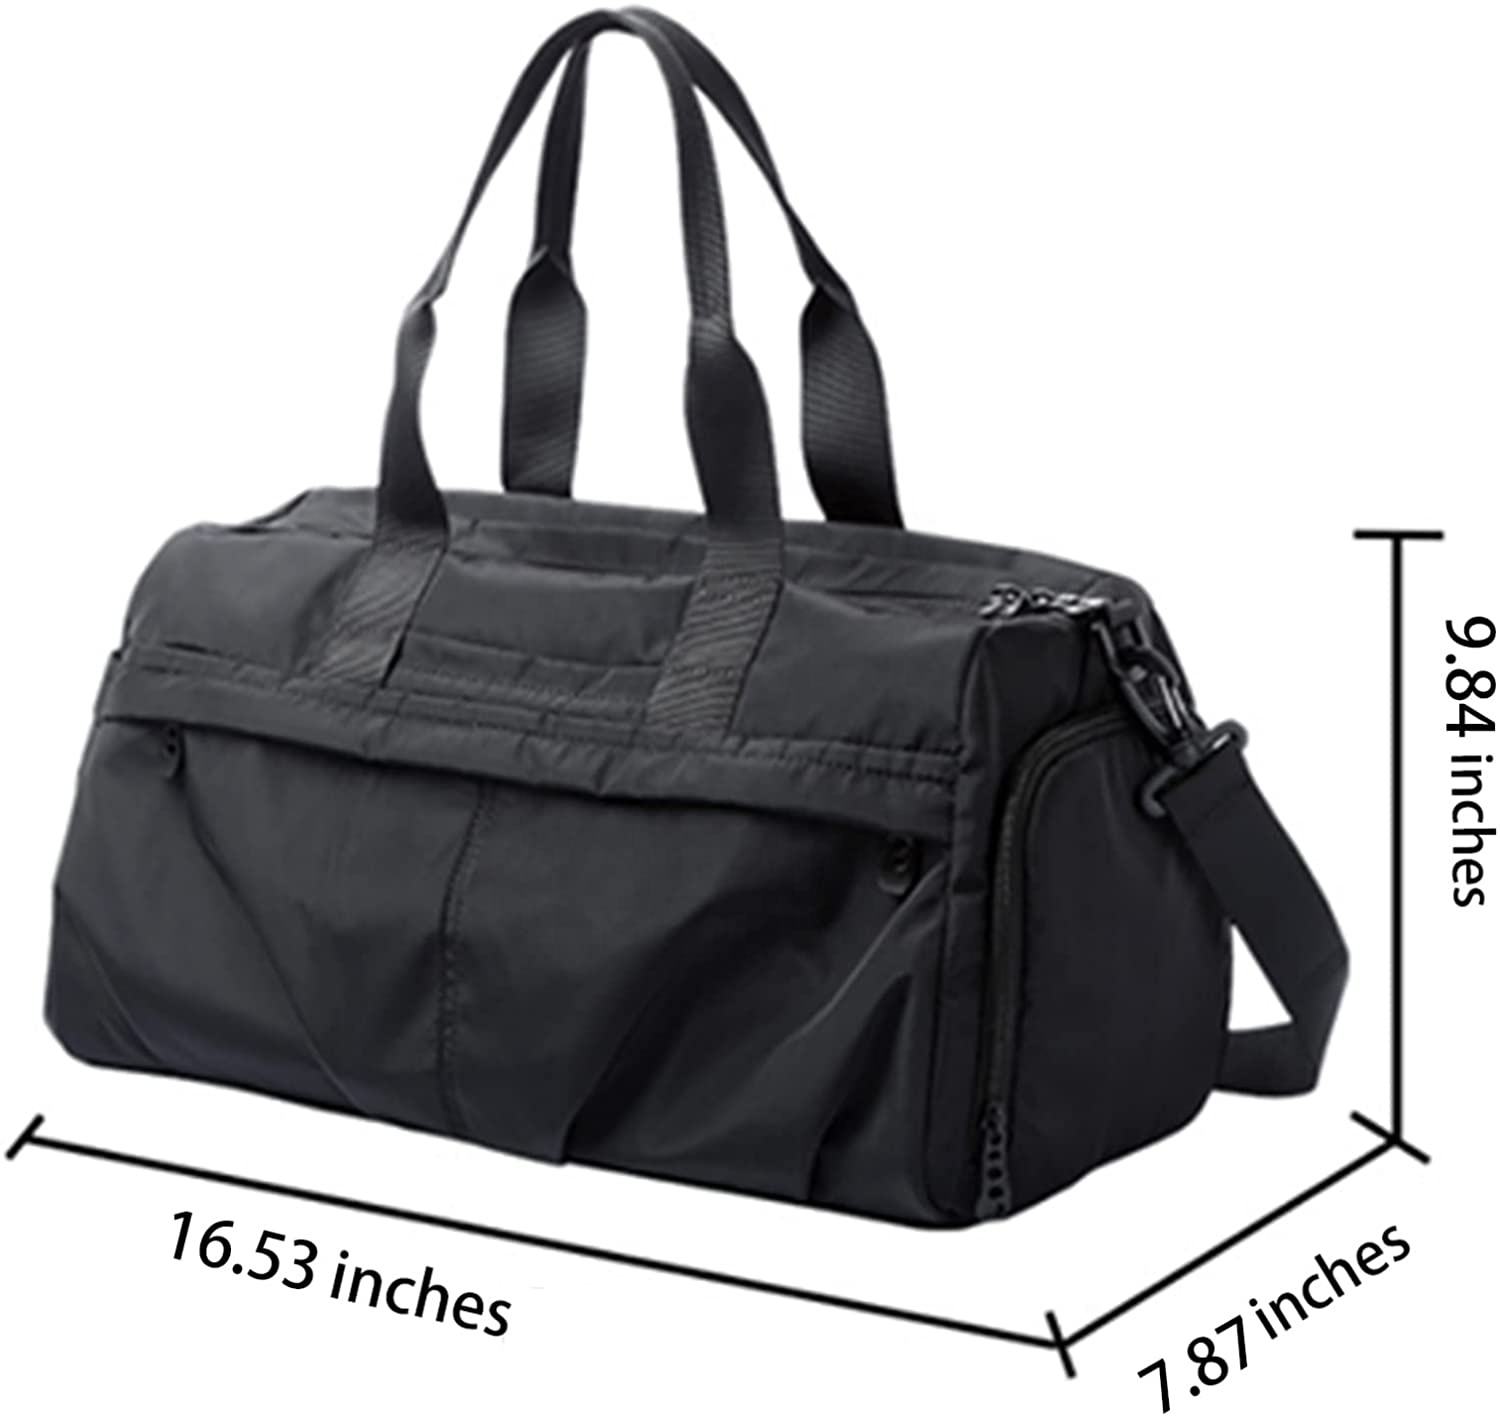 Gym Bag Travel Duffle Bag for Women Men with Shoe Compartment Waterproof Weekender Overnight Carry on Bag